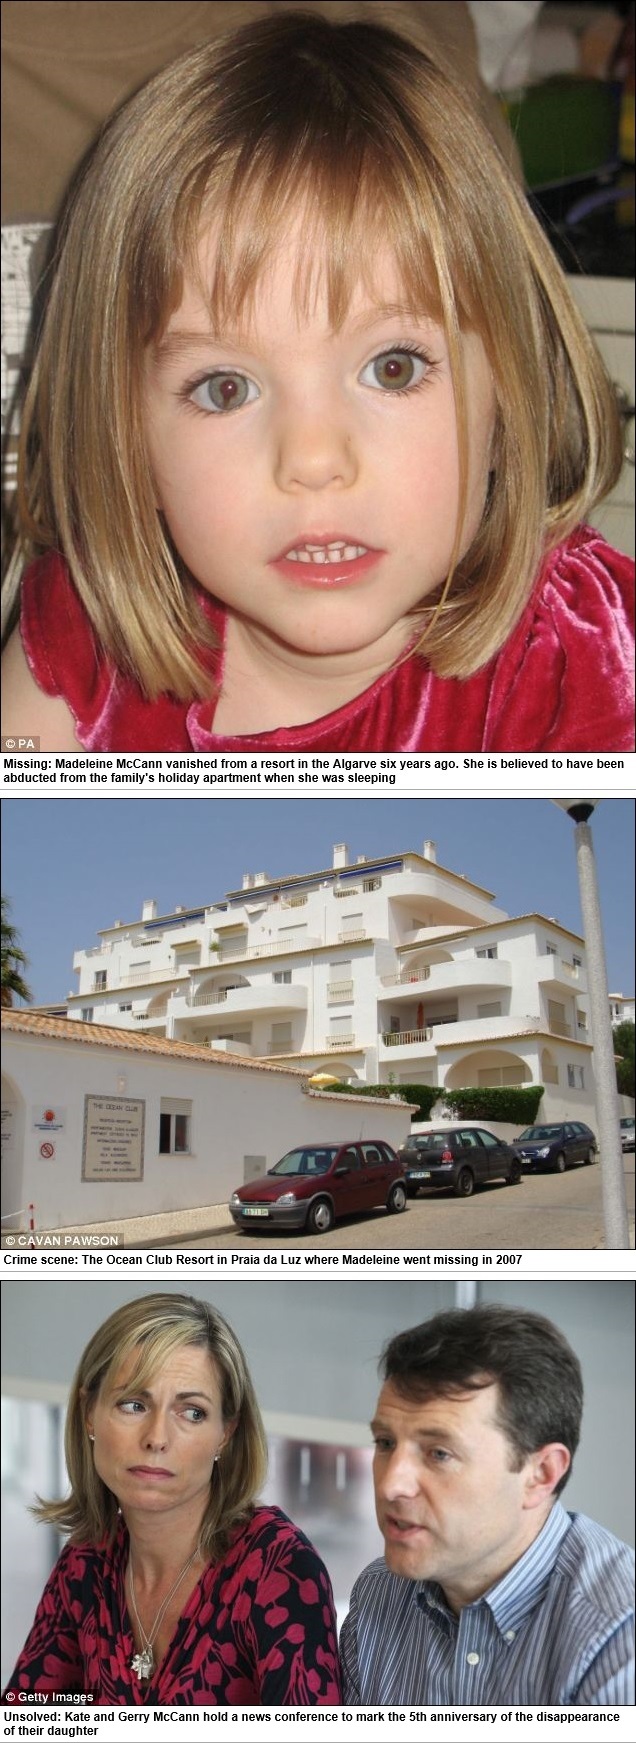 Missing: Madeleine McCann vanished from a resort in the Algarve six years ago. She is believed to have been abducted from the family's holiday apartment when she was sleeping